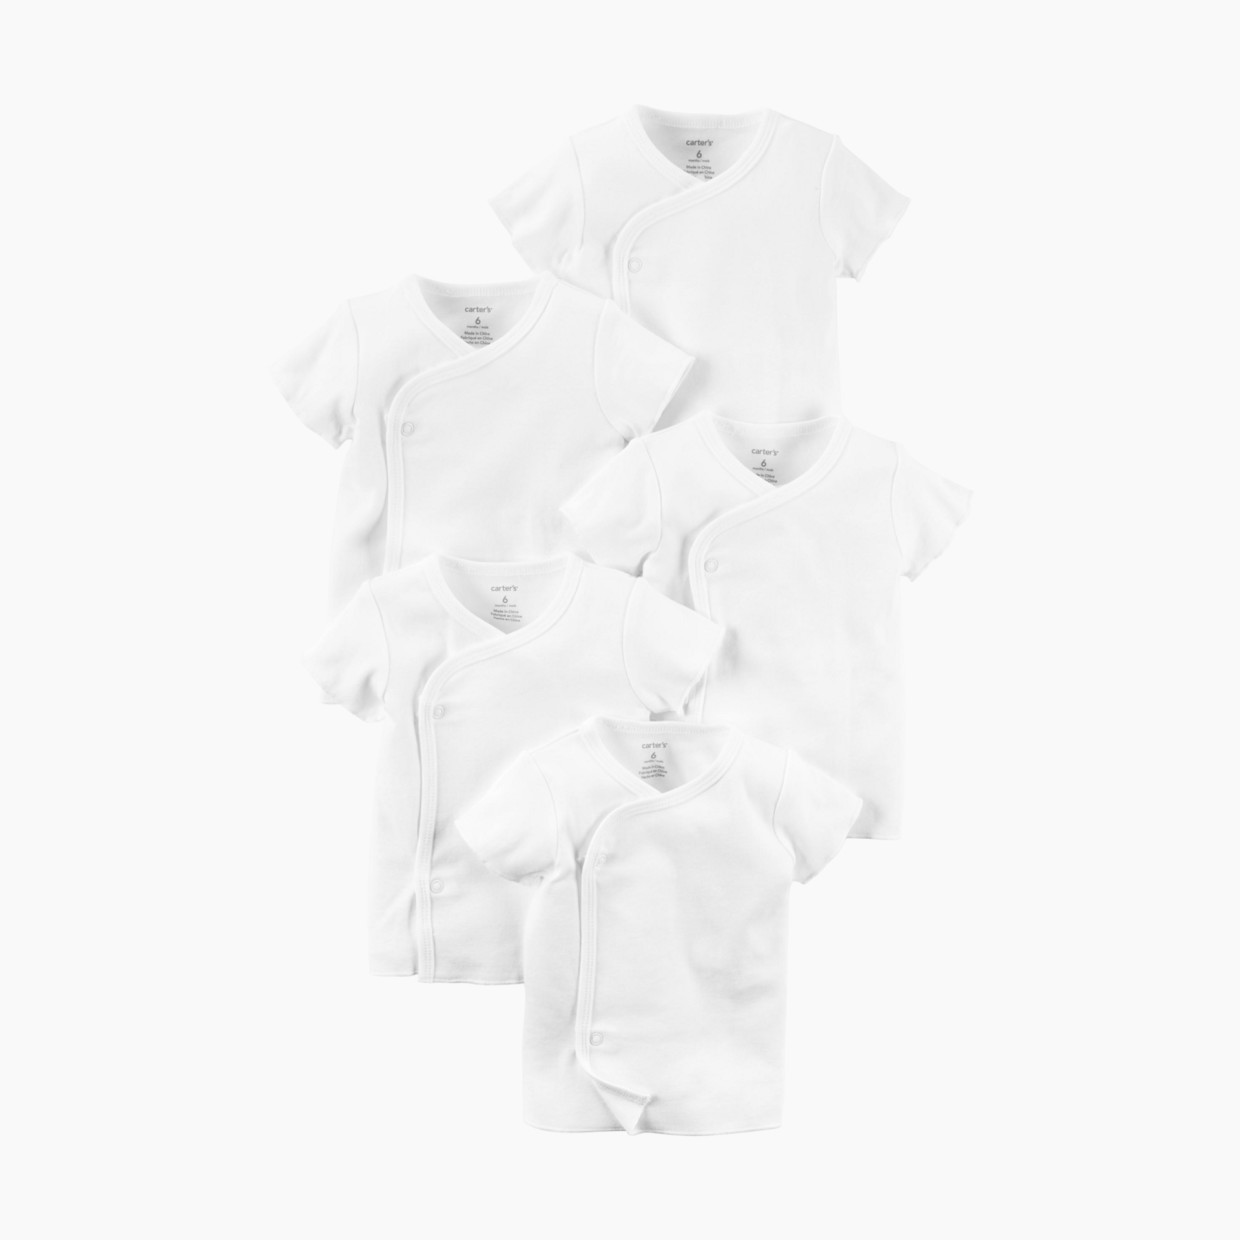 Carter's Side-Snap Tees (5 Pack) - White, Nb.